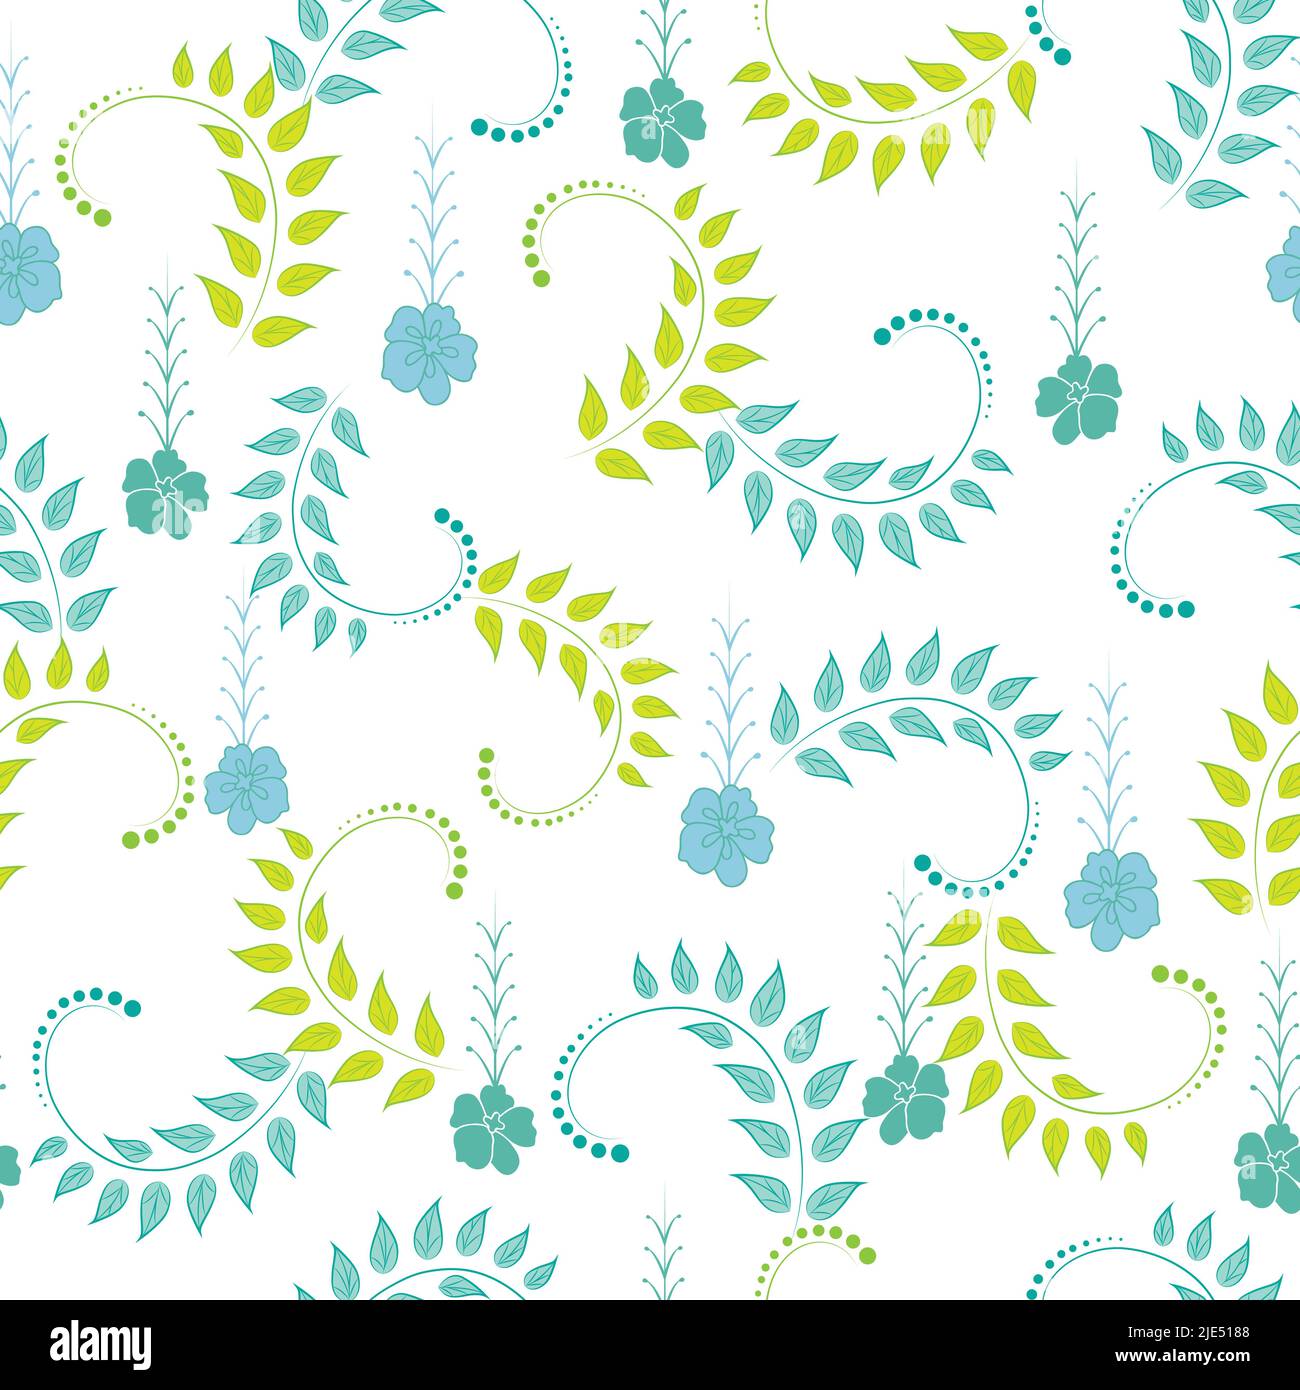 Blue green Vector Hand drawn Seamless pattern Background. Stock Vector